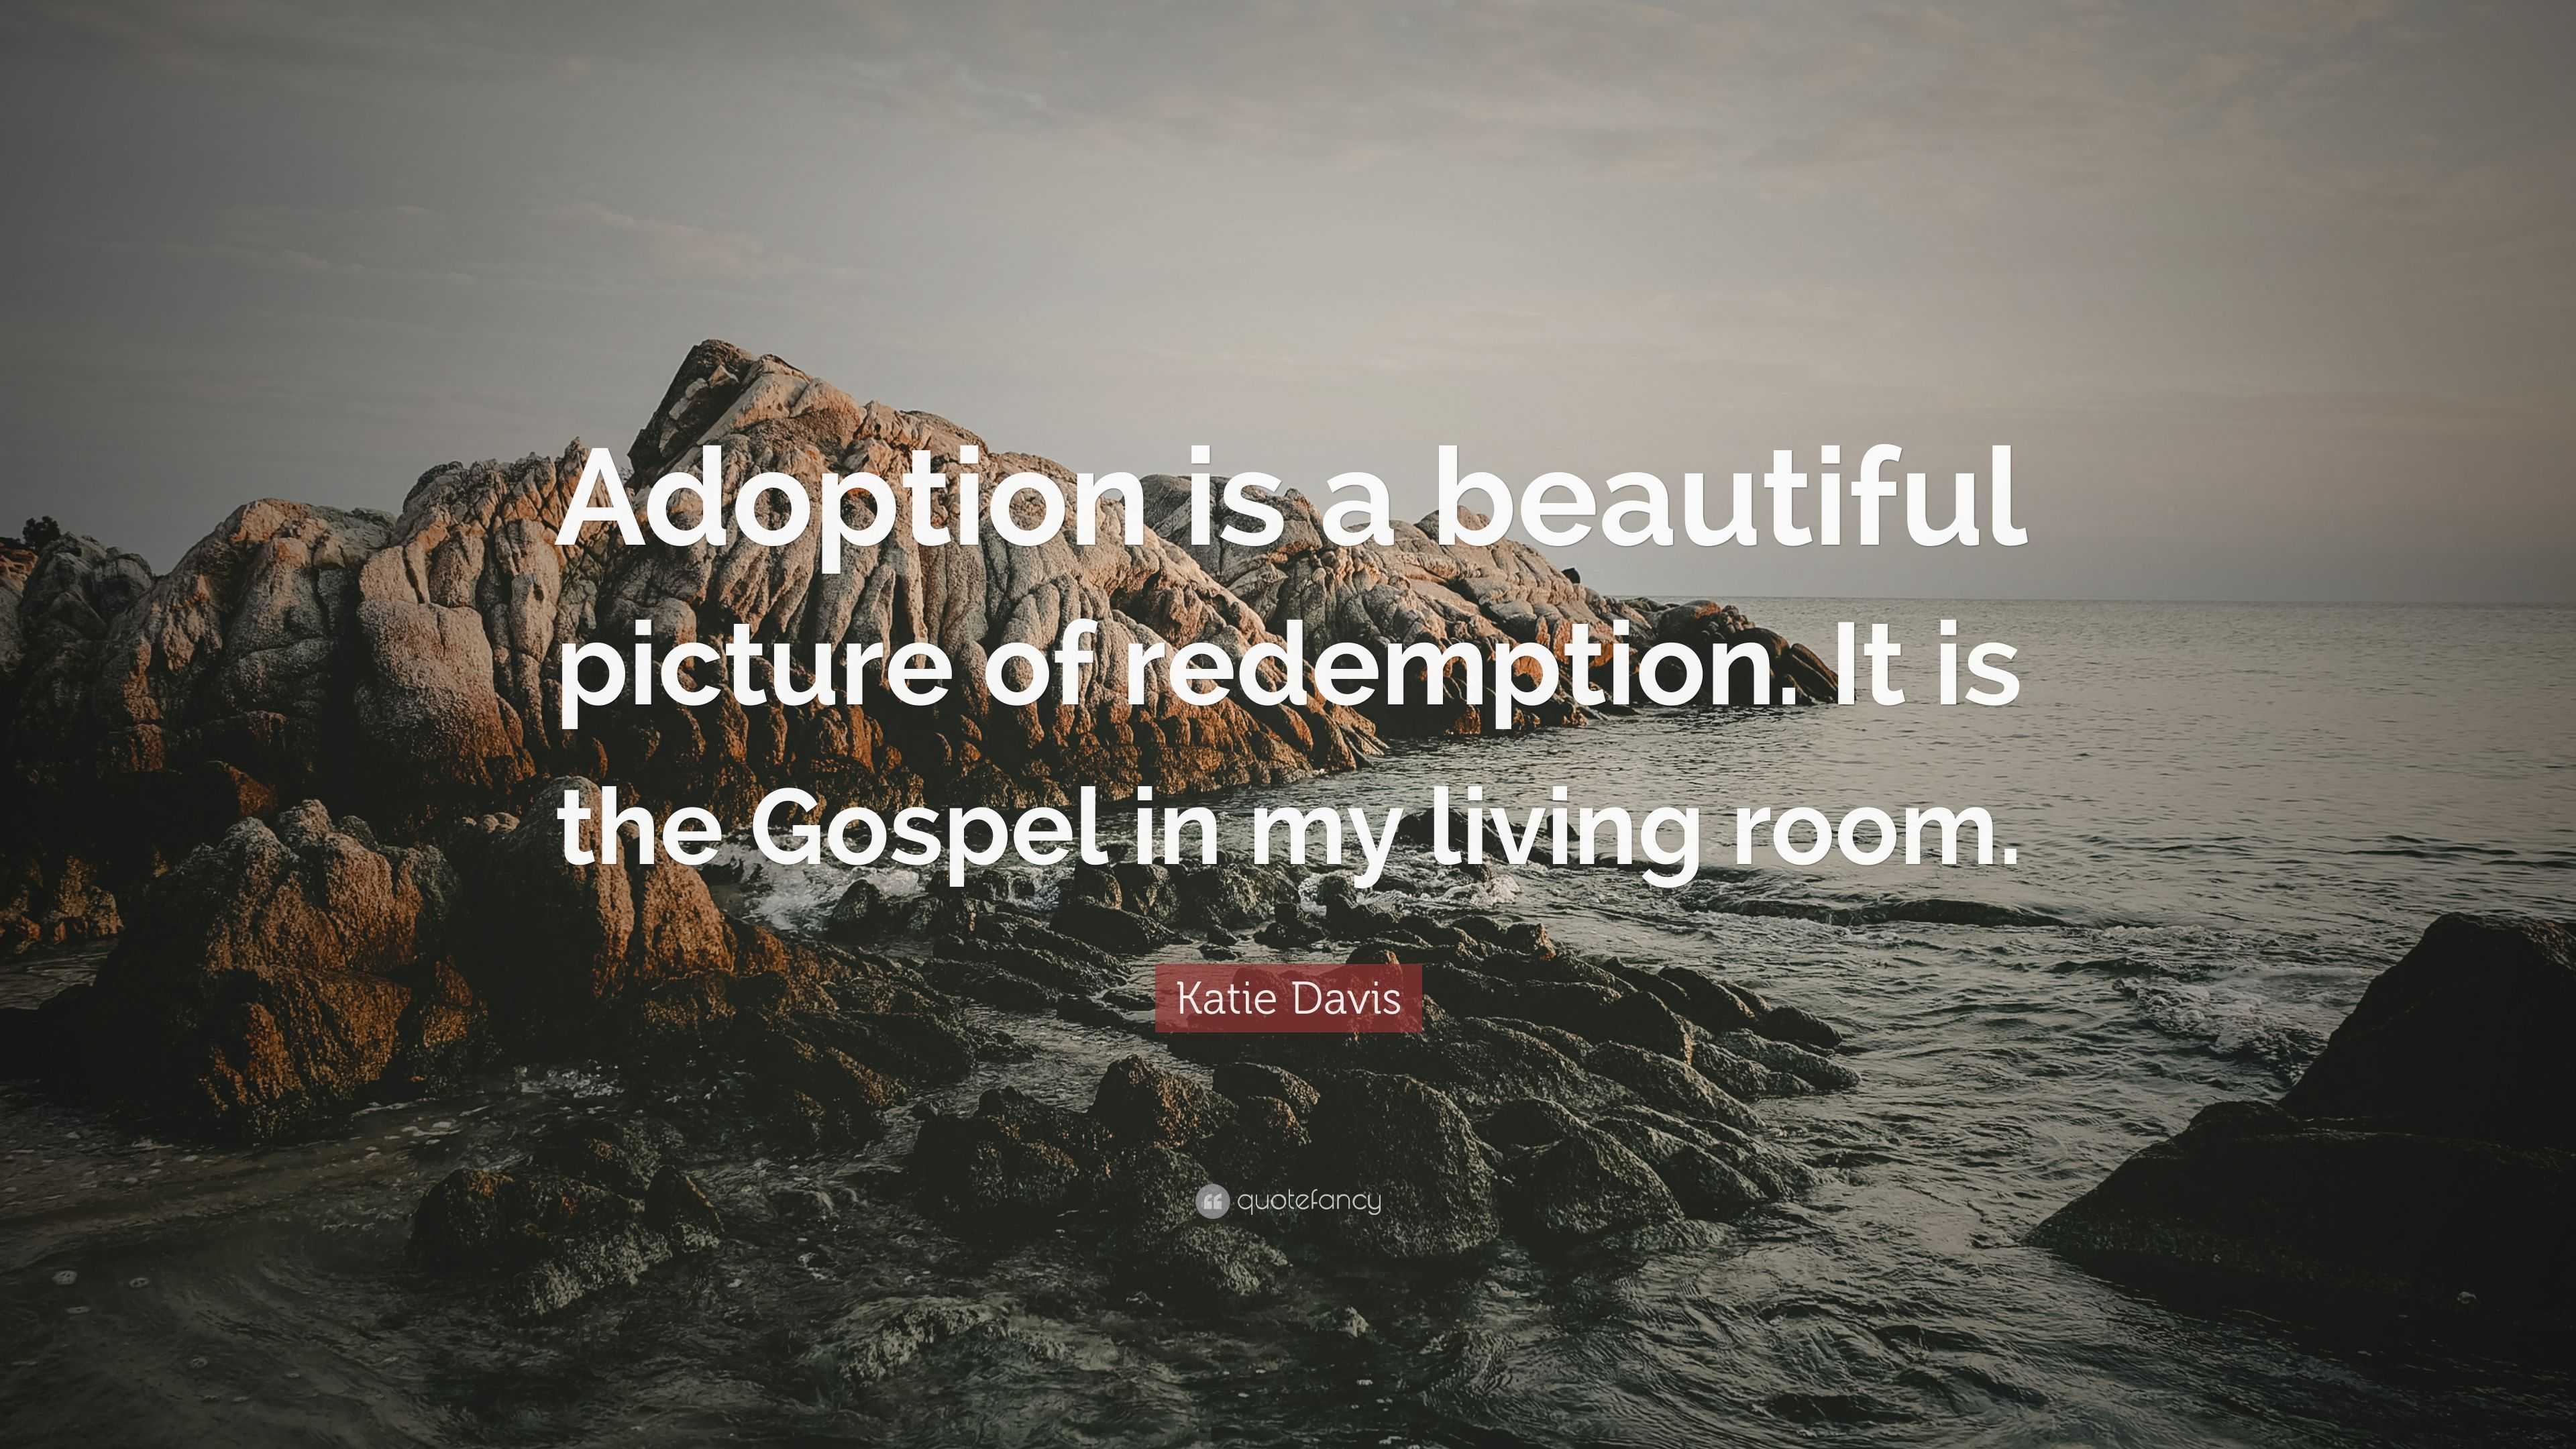 Katie Davis Quote: "Adoption is a beautiful picture of ...